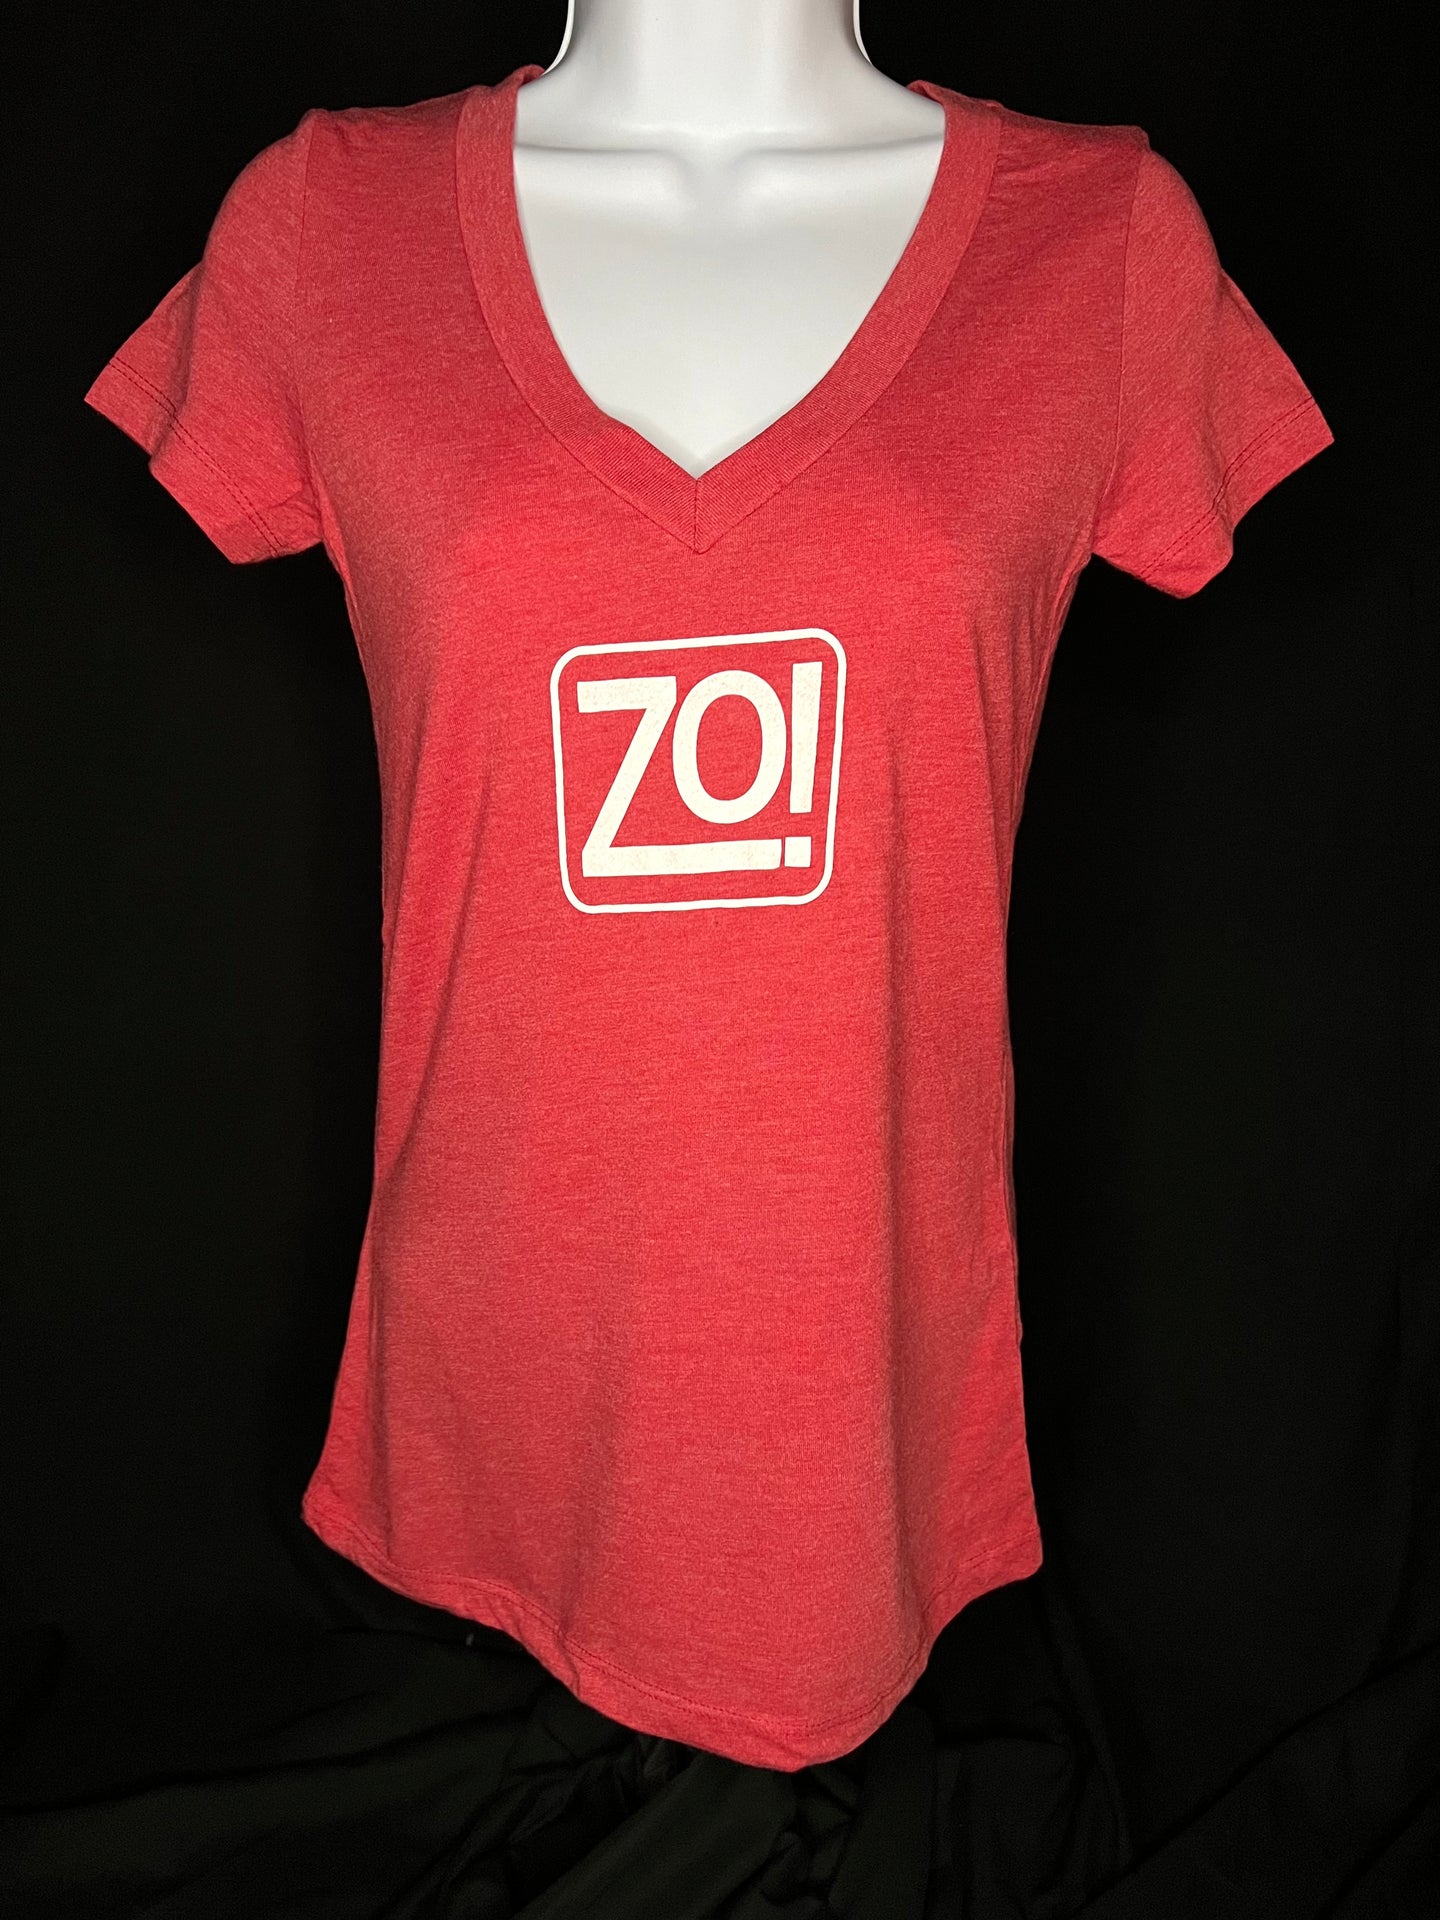 Zo! Red Tri-Blend V-Neck T-Shirt (Women's Fitted)